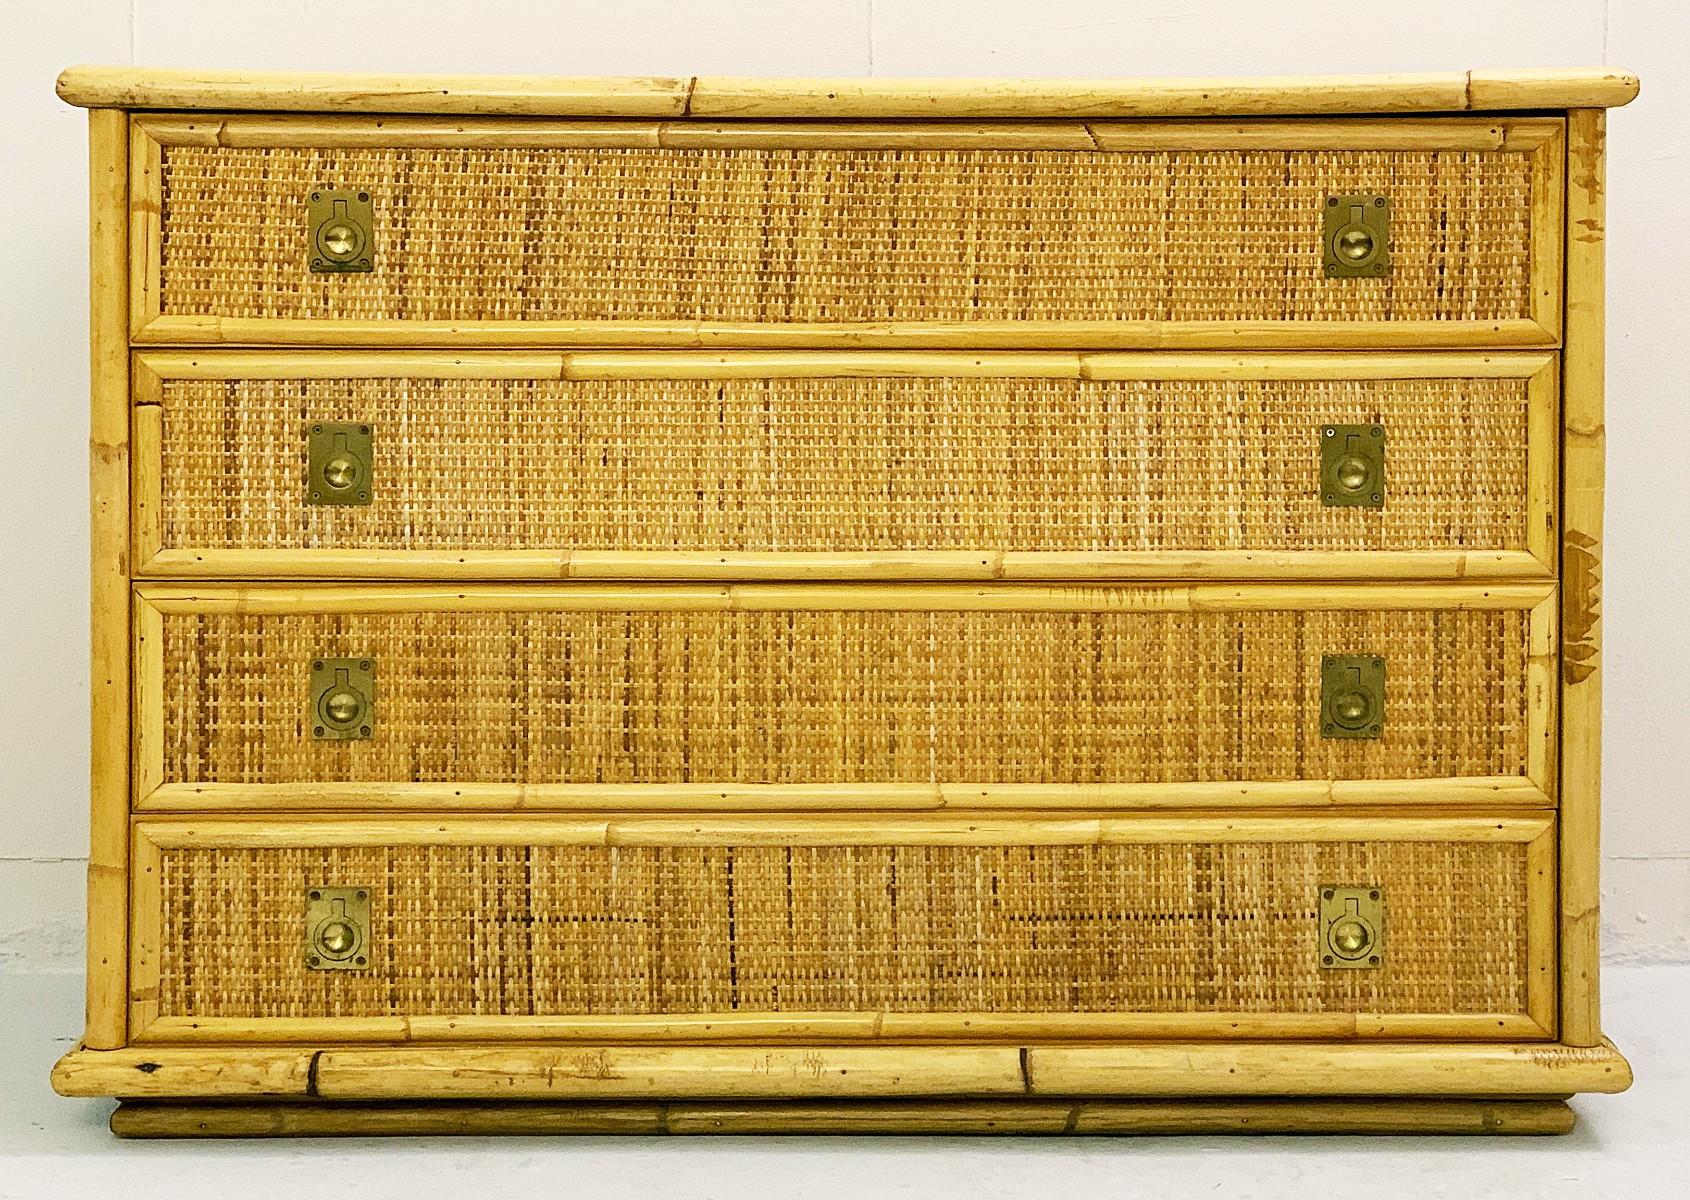 Dal Vera bamboo and wicker/rattan chest of drawers, Italy, 1960s.